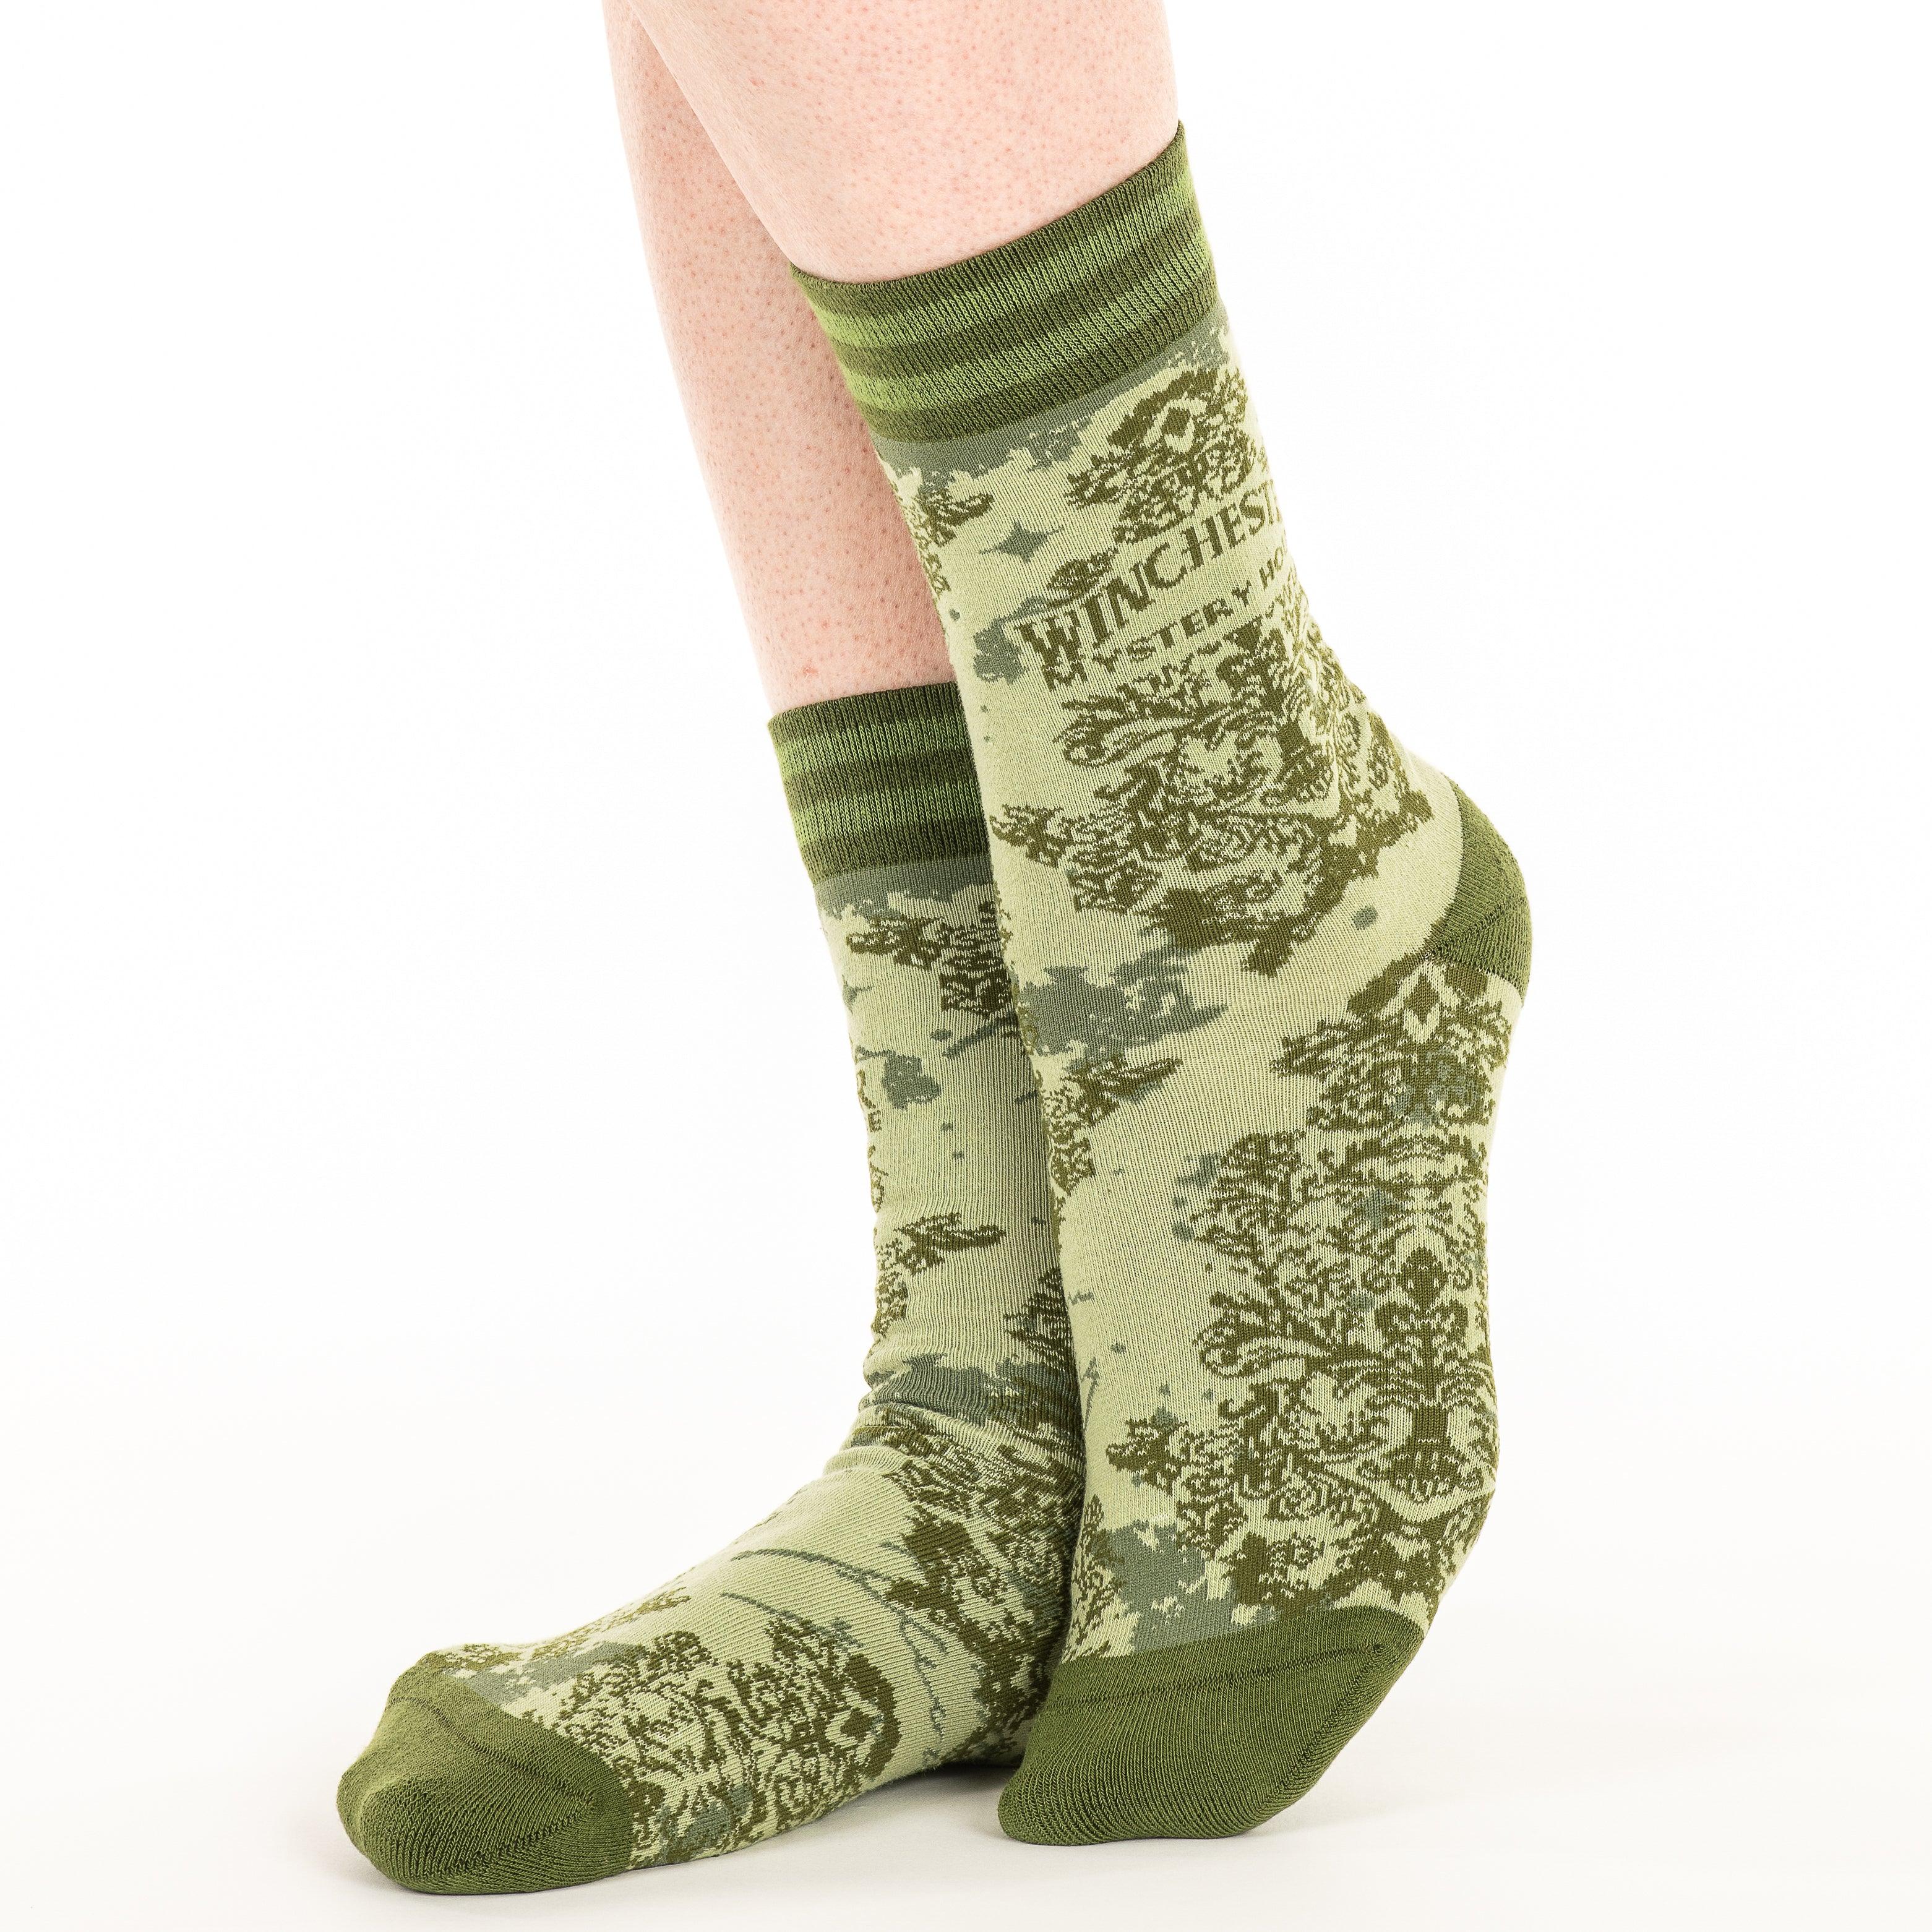 Winchester Mystery House® Ghoulish Green Damask Crew Socks - FootClothes